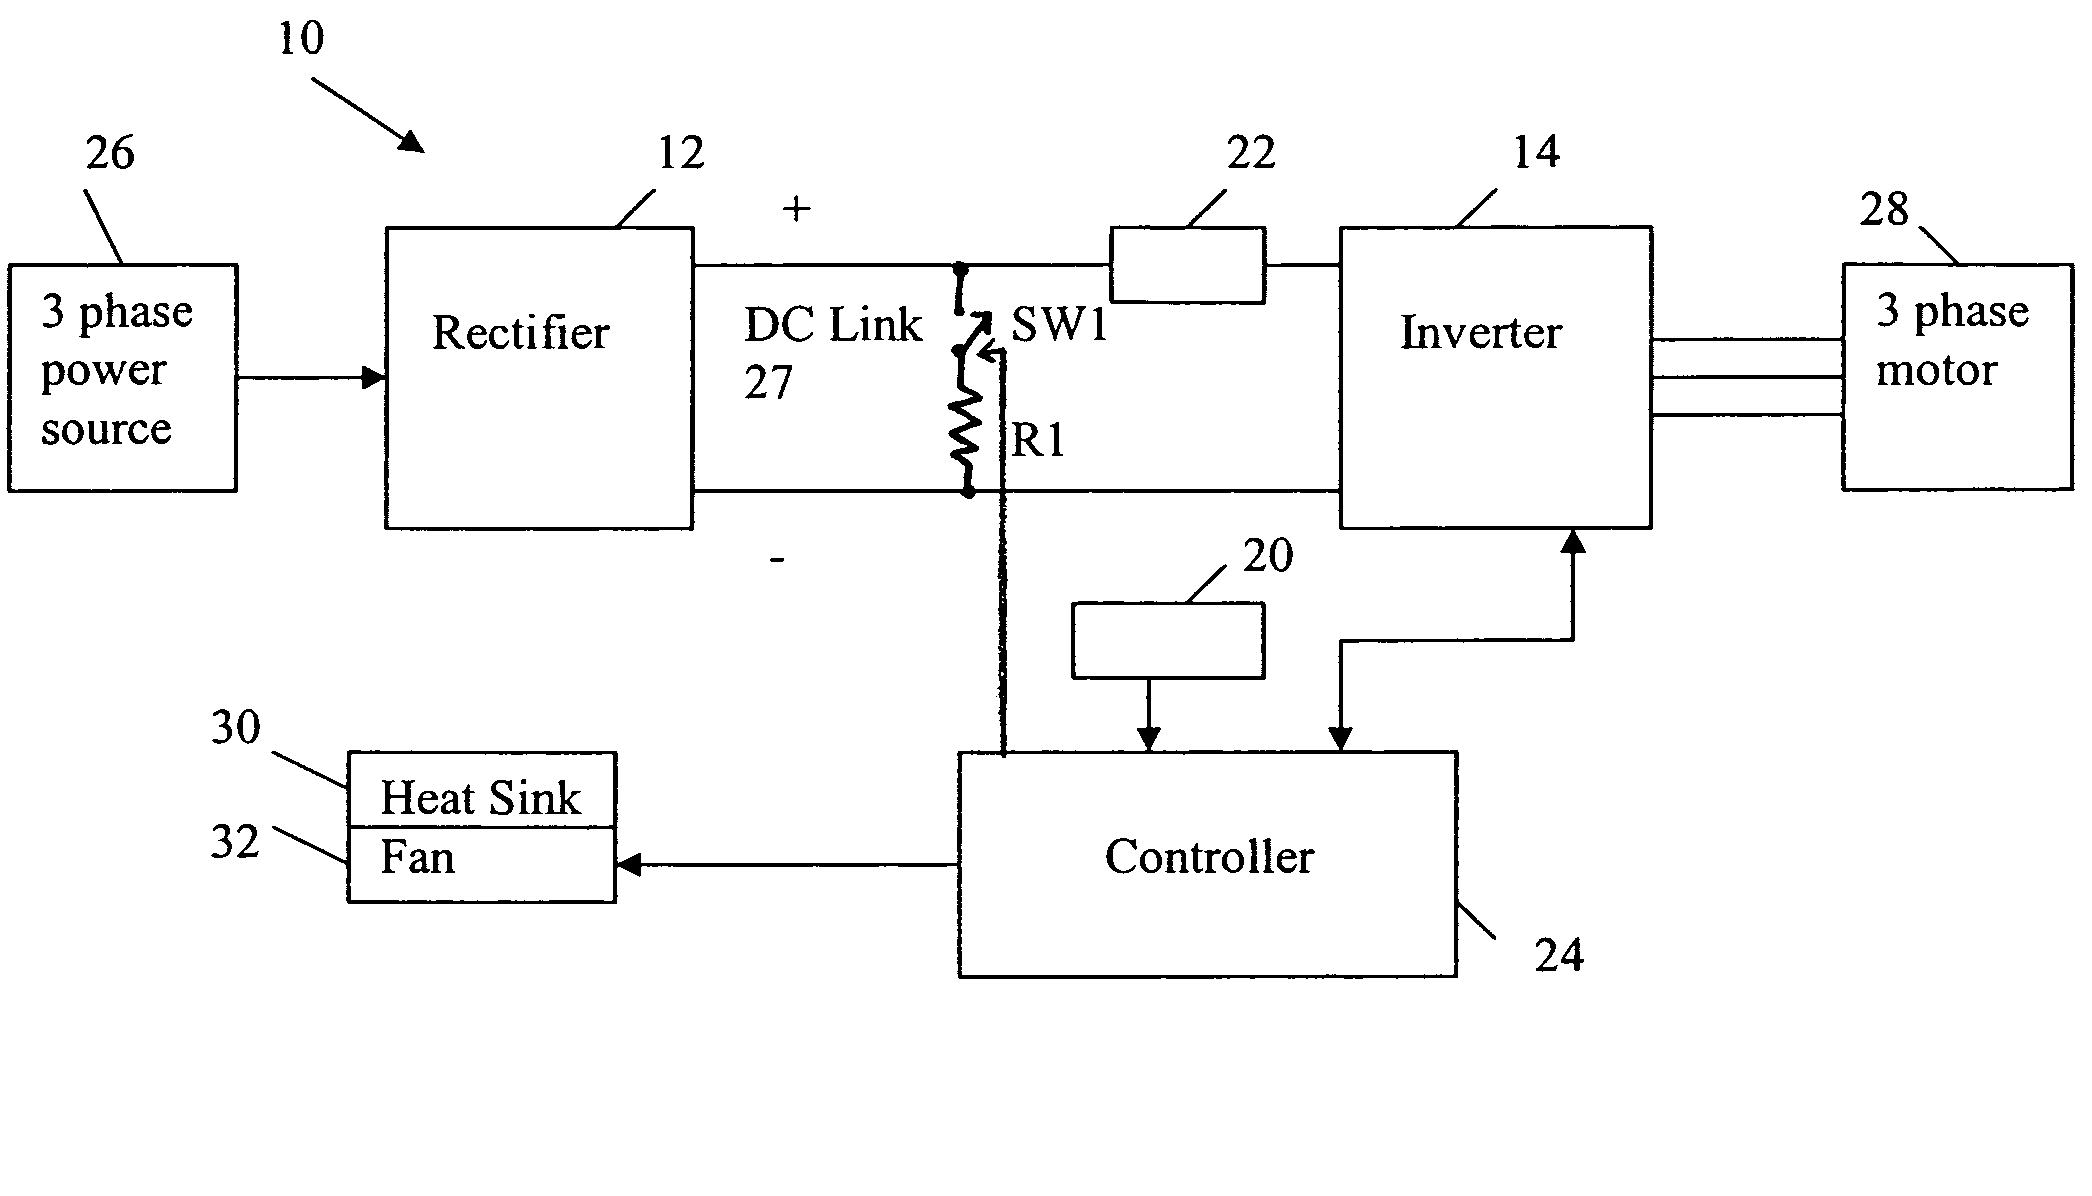 Thermal regulation of AC drive